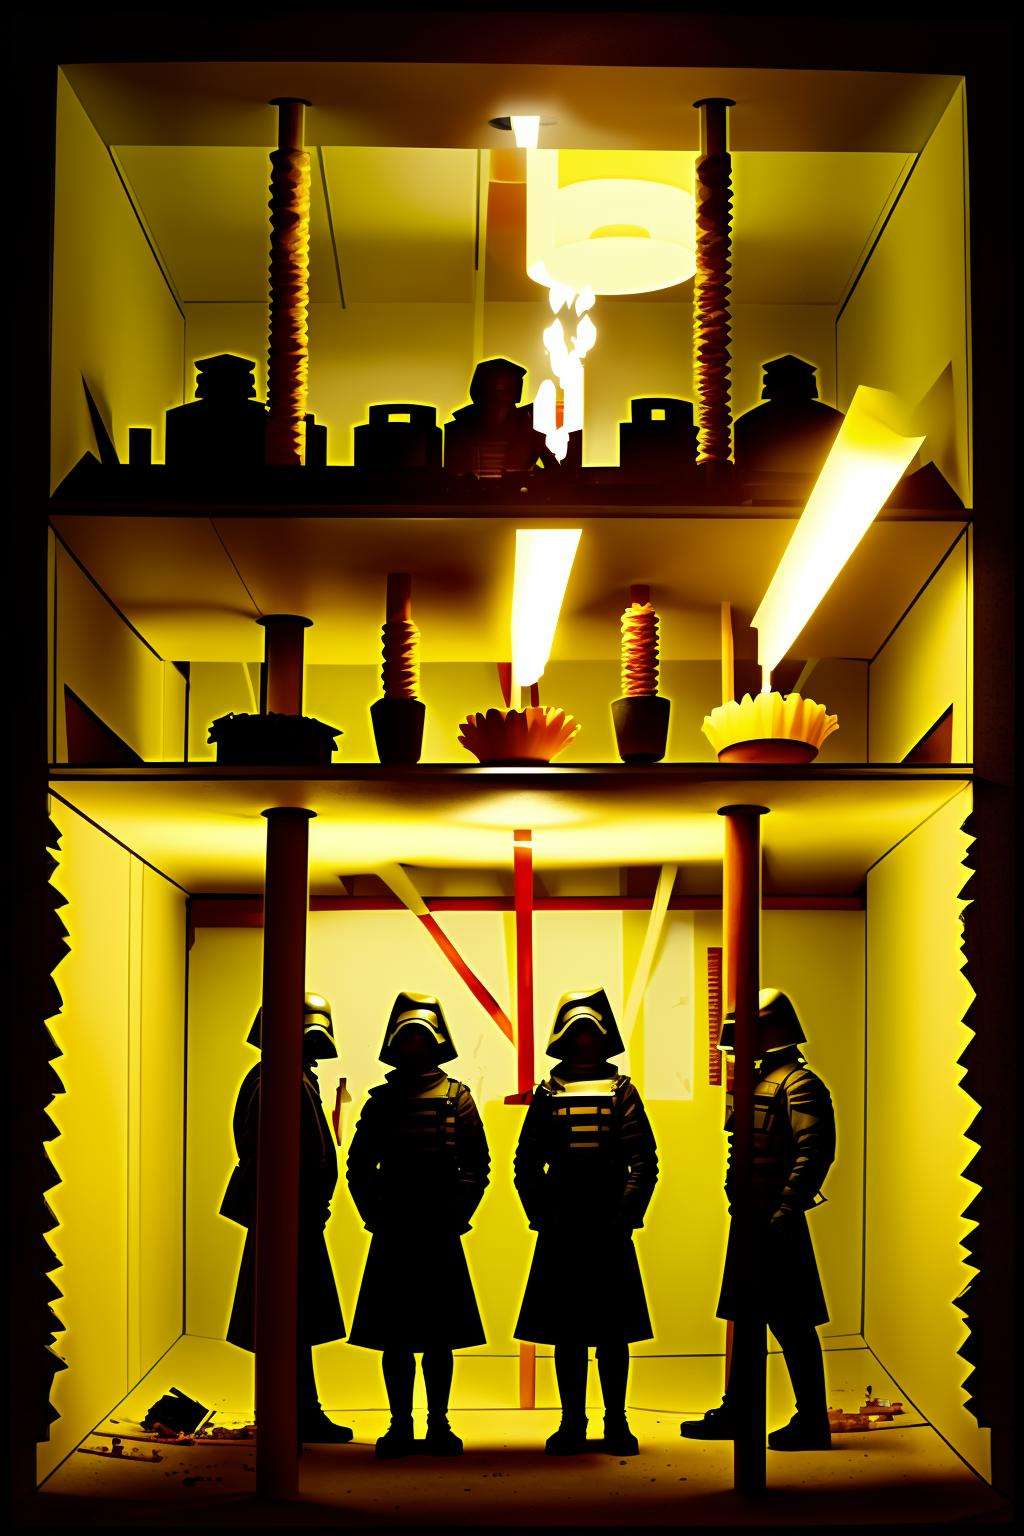 con_art1 Underground hideout, dimly lit with sputtering candles, rebels huddled, conspiring against a dystopian regime.